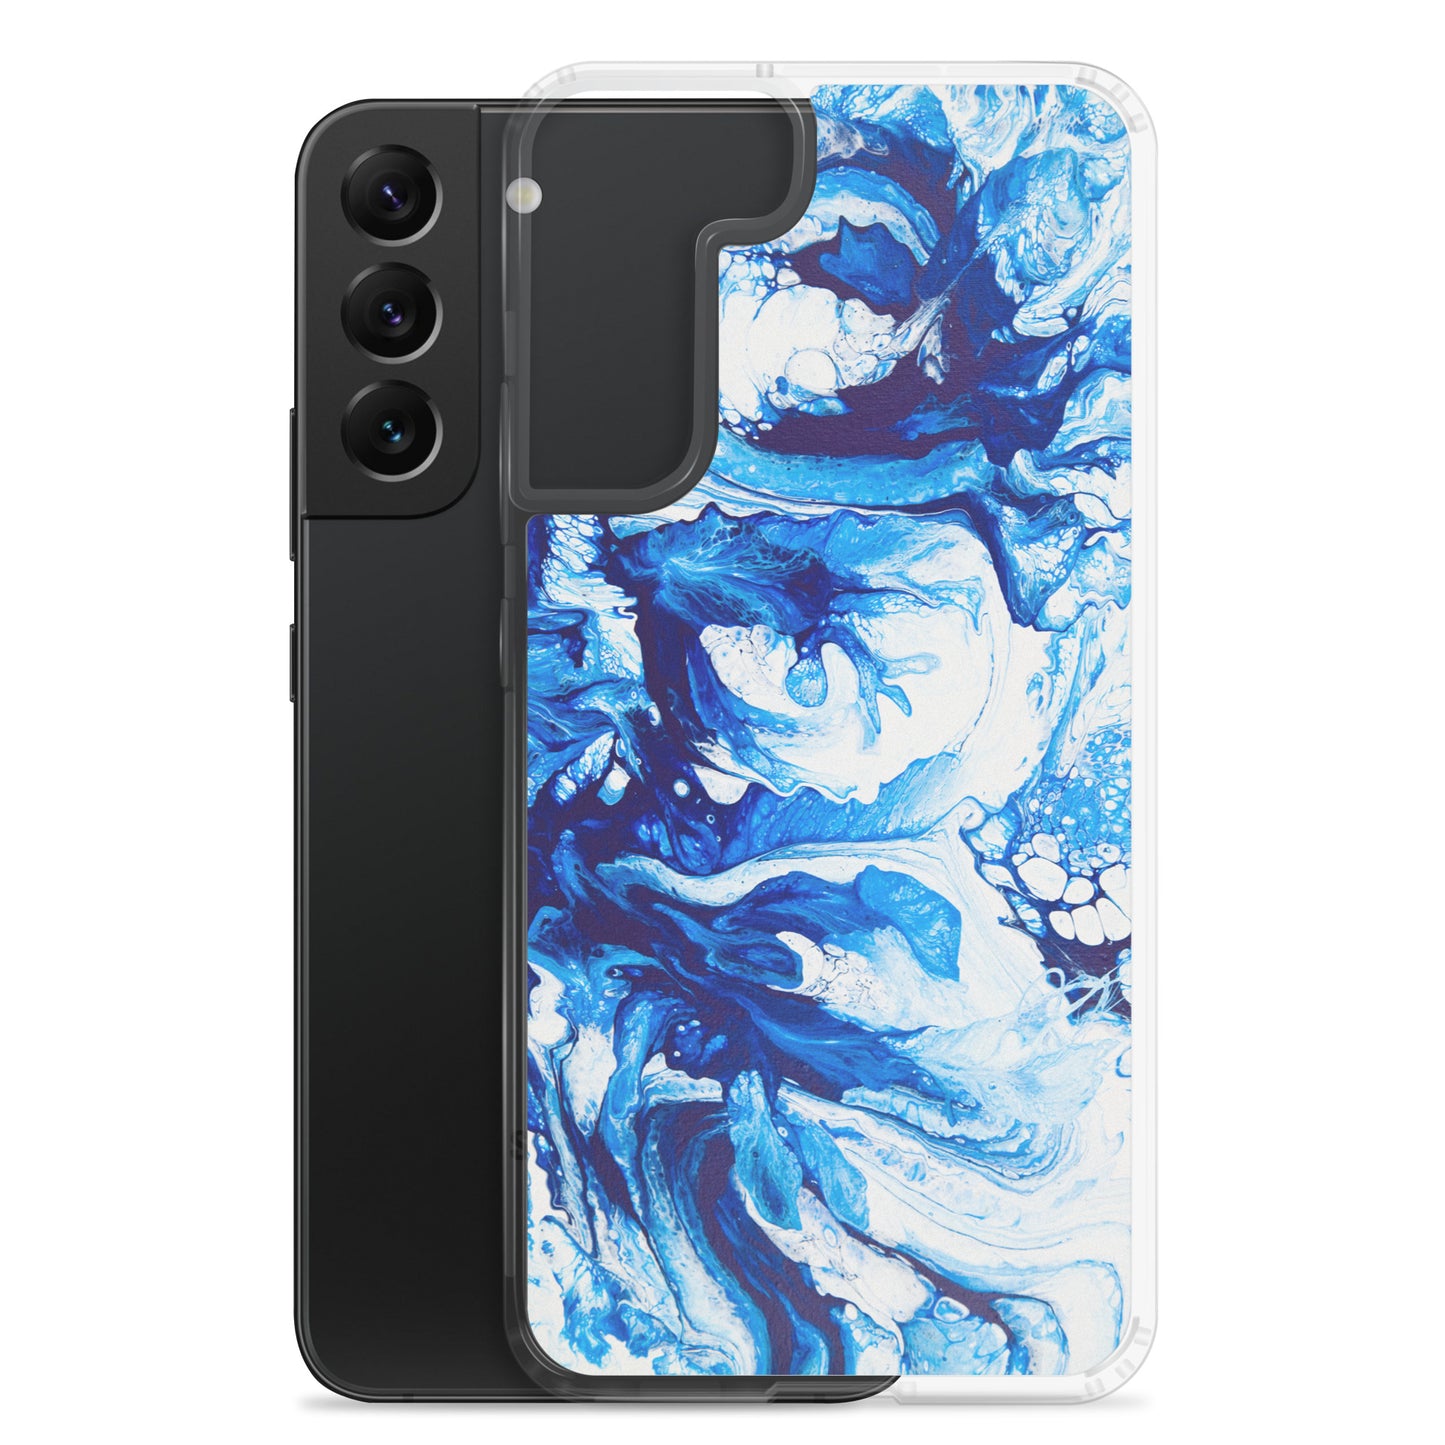 NightOwl Studio Custom Phone Case Compatible with Samsung Galaxy, Slim Cover for Wireless Charging, Drop and Scratch Resistant, The Jester